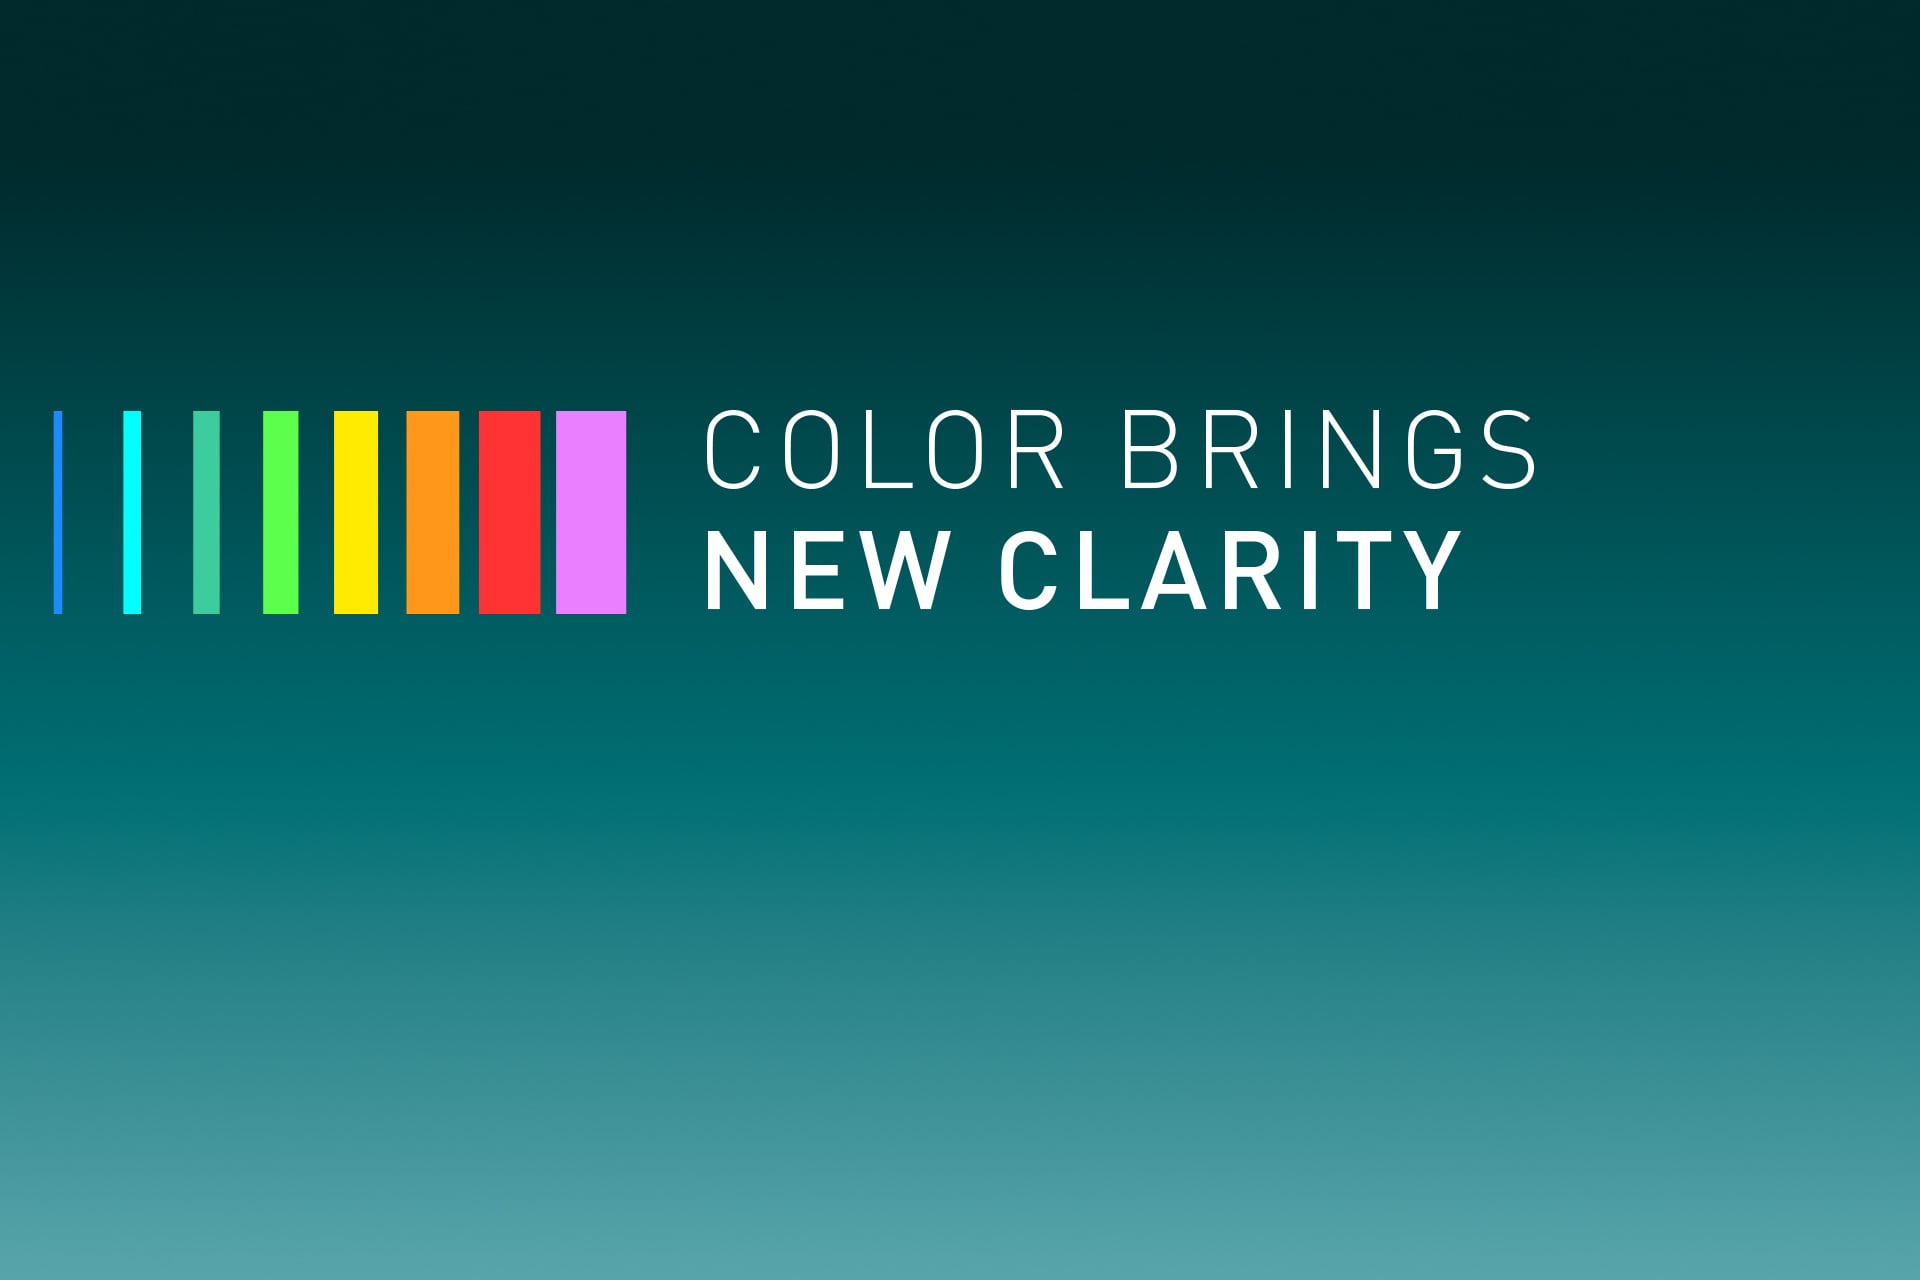 Color brings new clarity